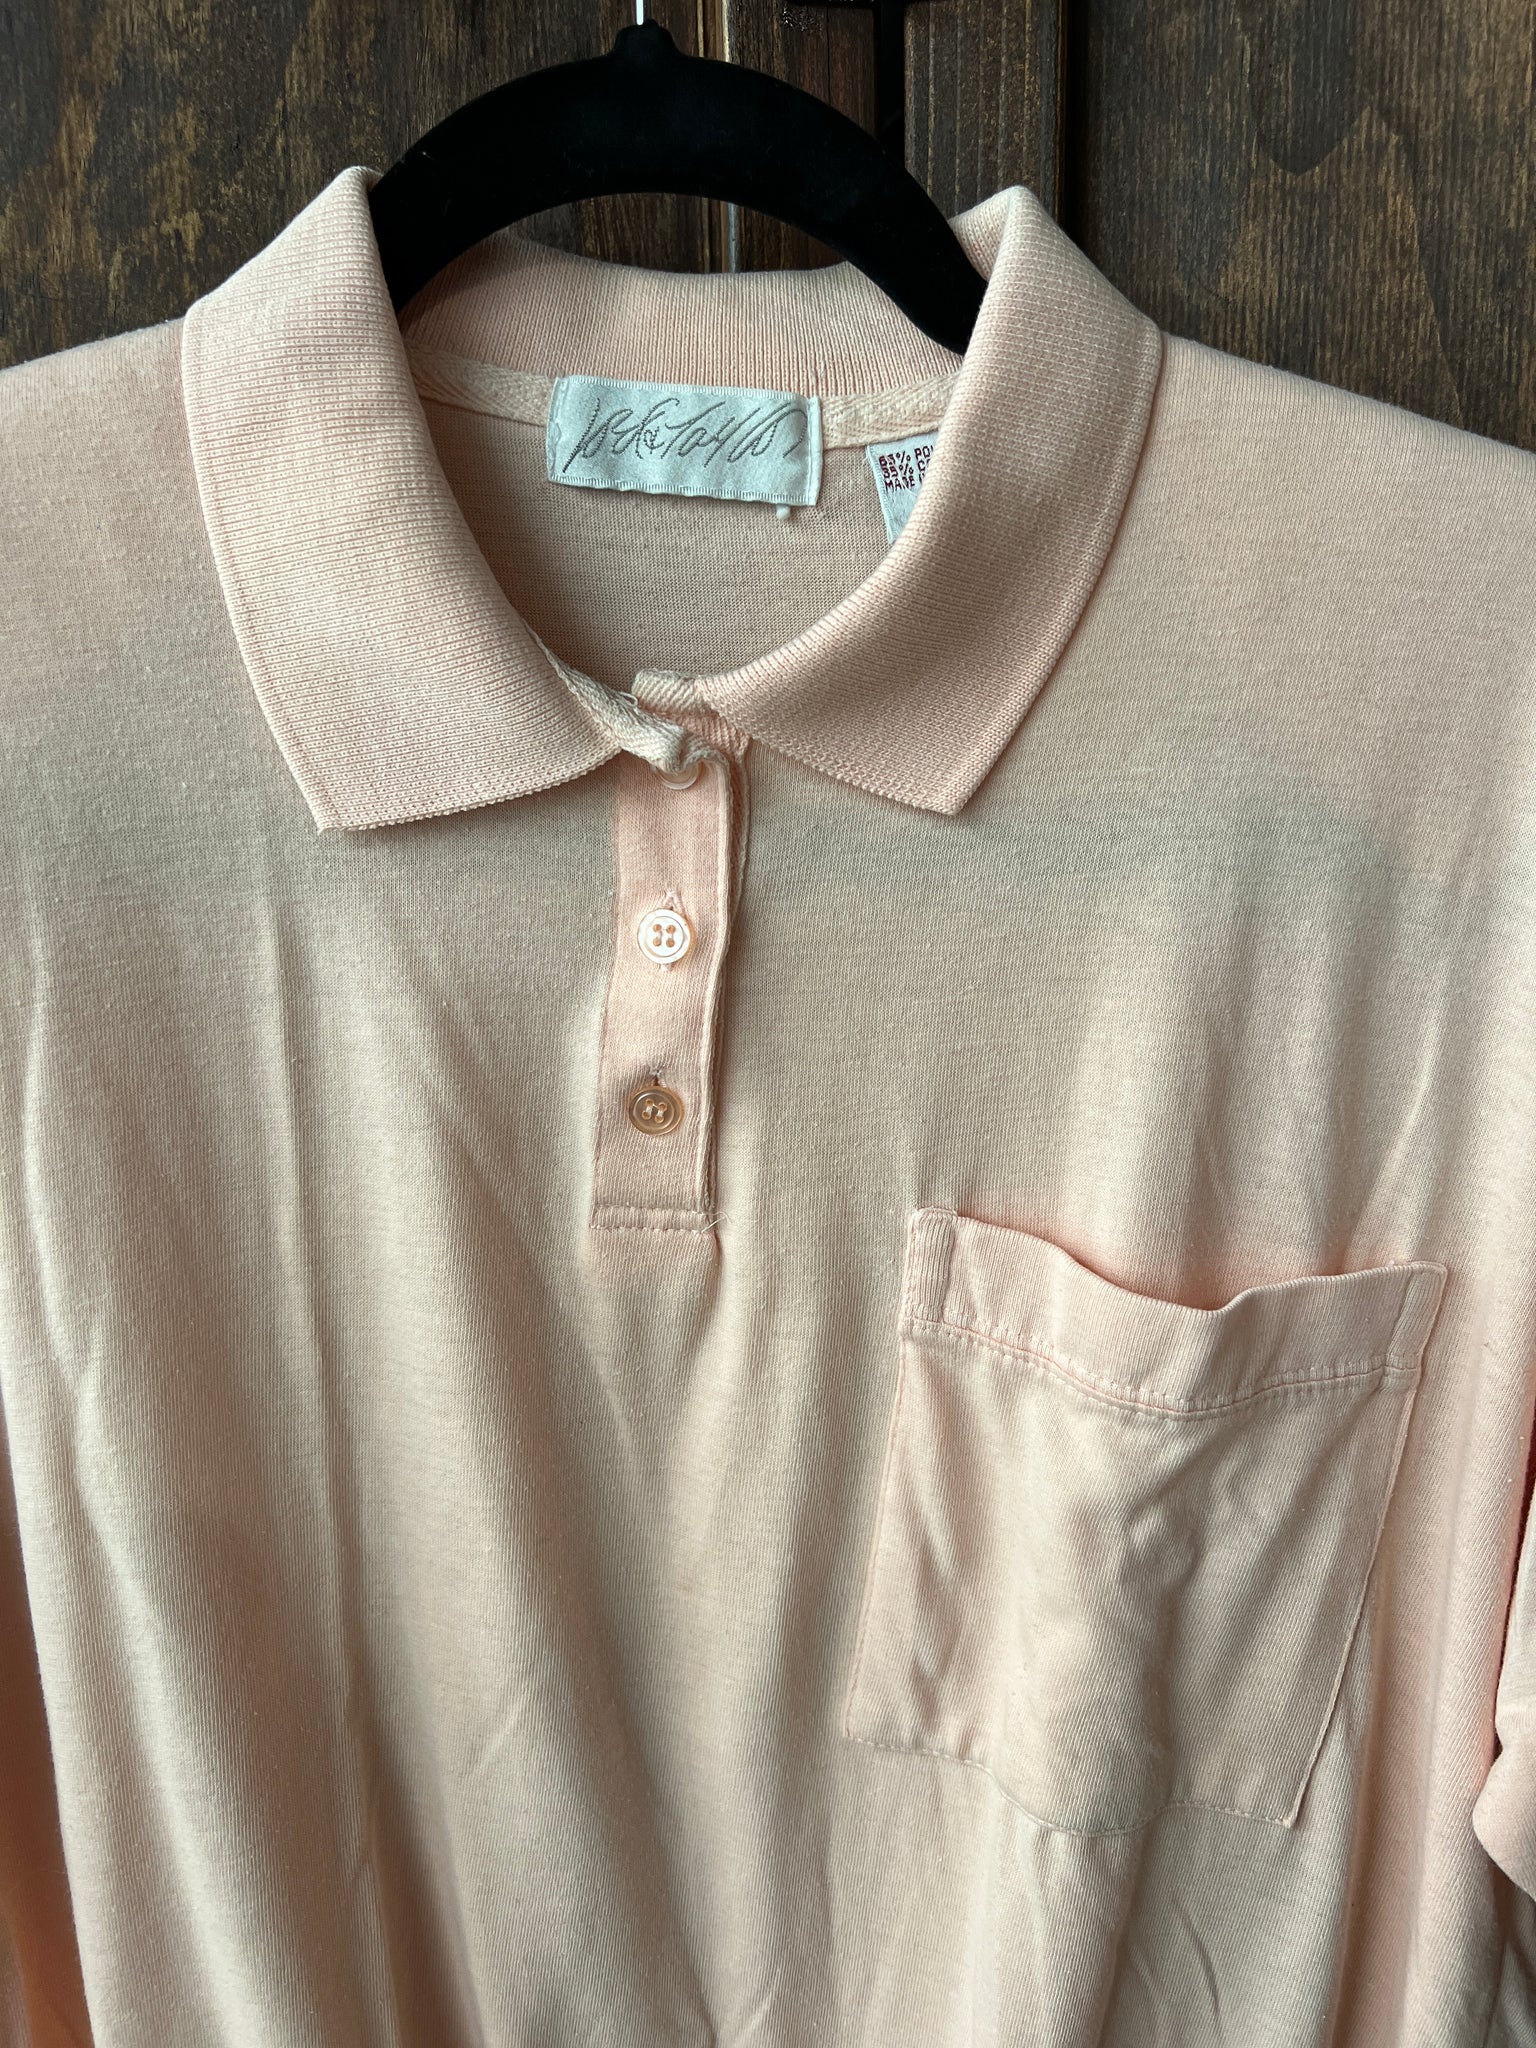 1980s TOPS- Lord & Taylor peach banded polo